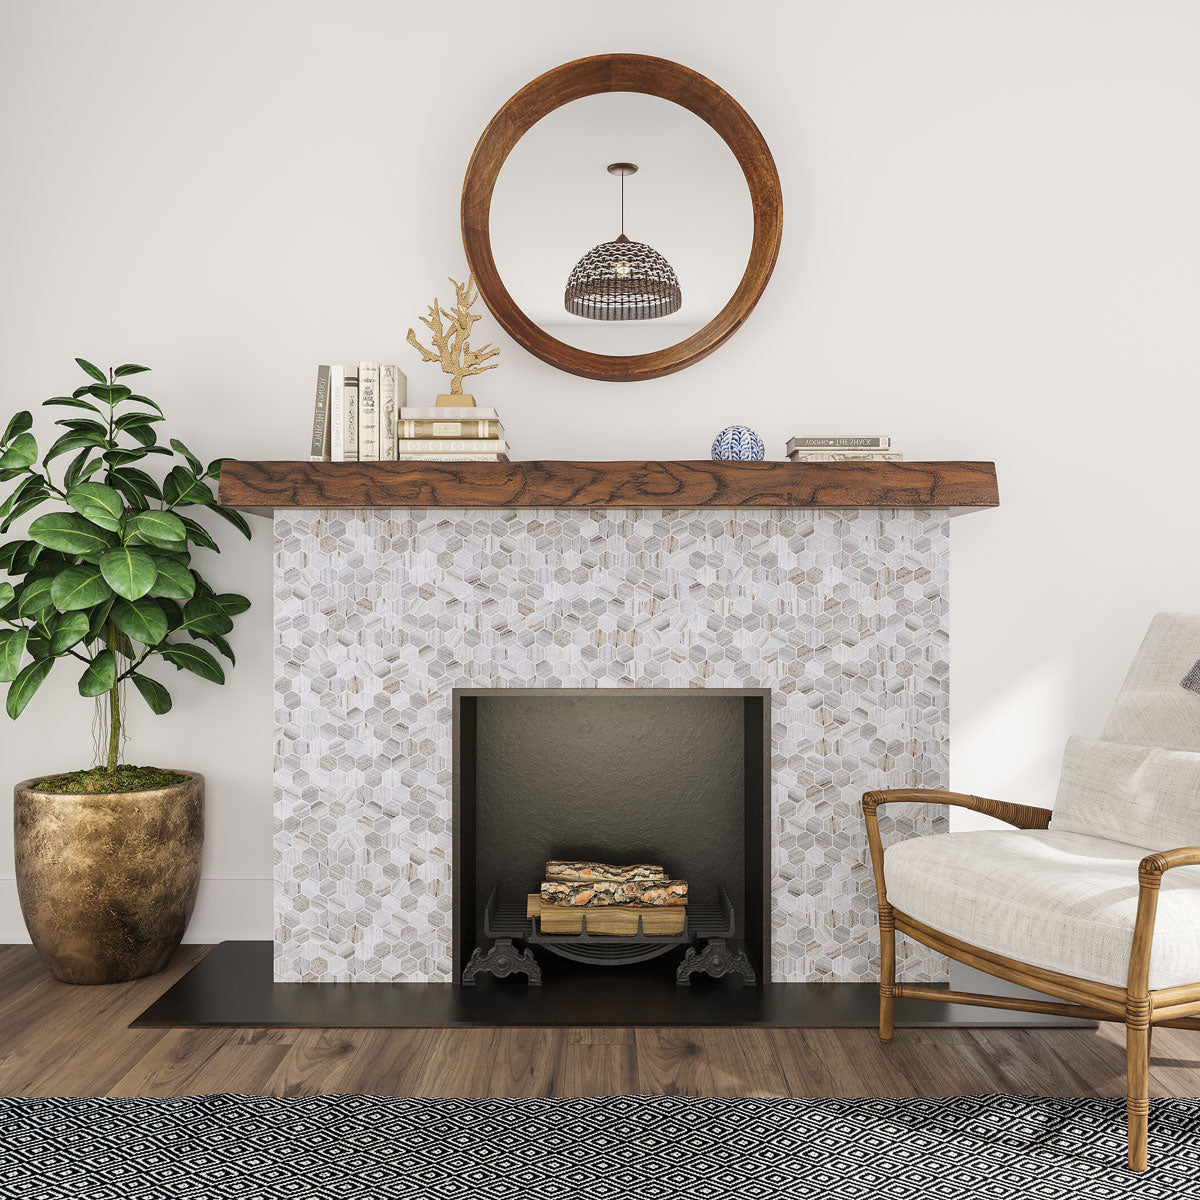 Sand Valley Honed Hexagon Mosaic Tile fireplace surround